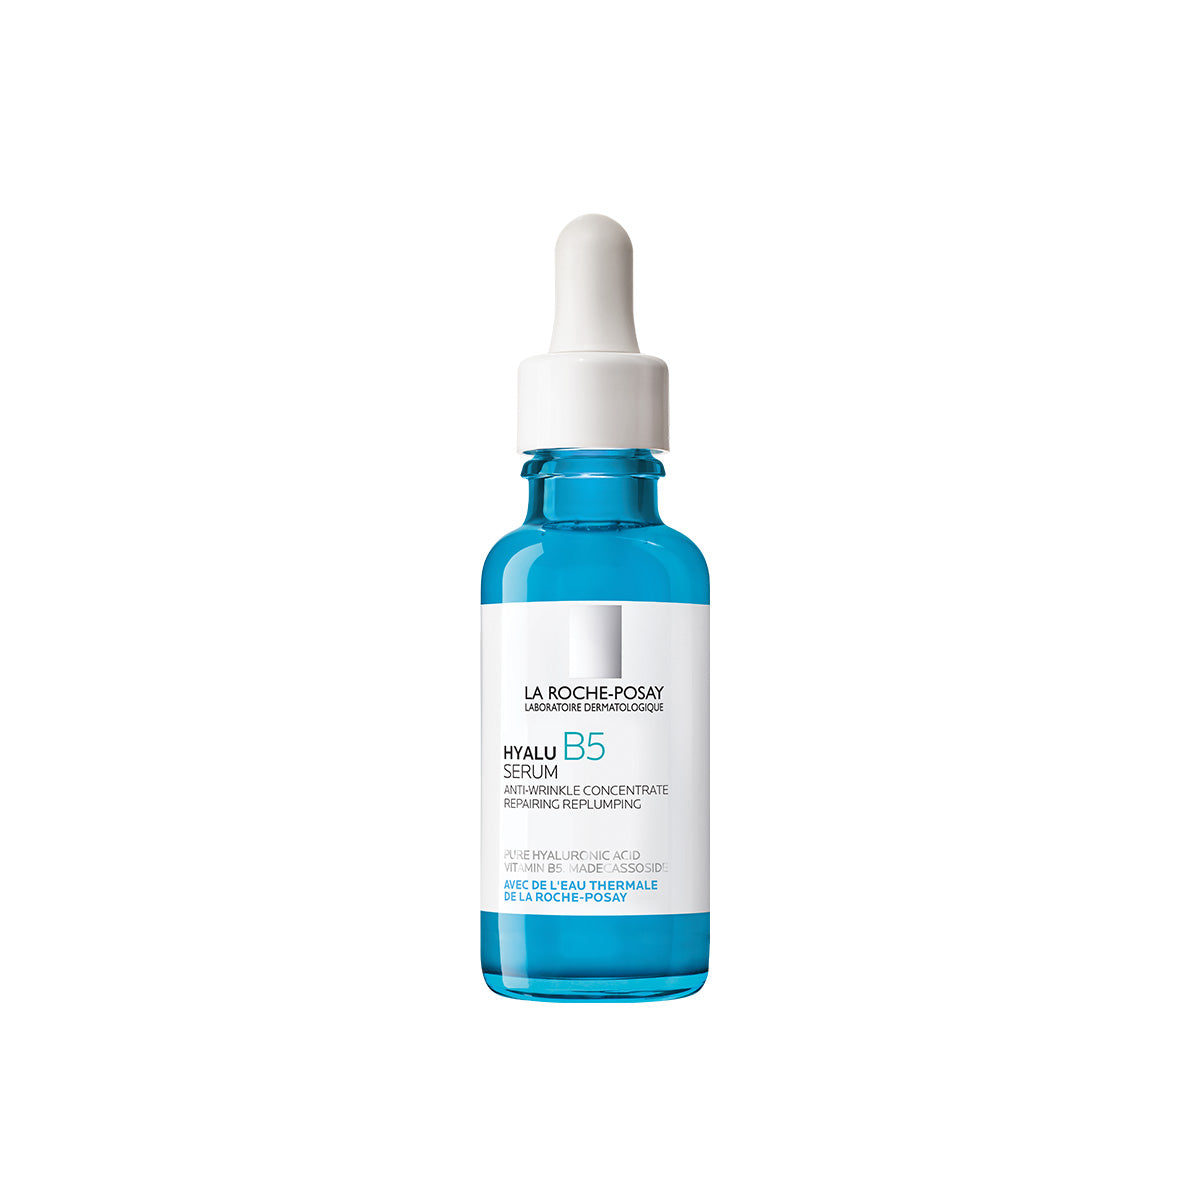 La Roche-Posay Hyalu B5 Serum Anti-Wrinkle Concentrate Repairing Replumping, Front view stock image